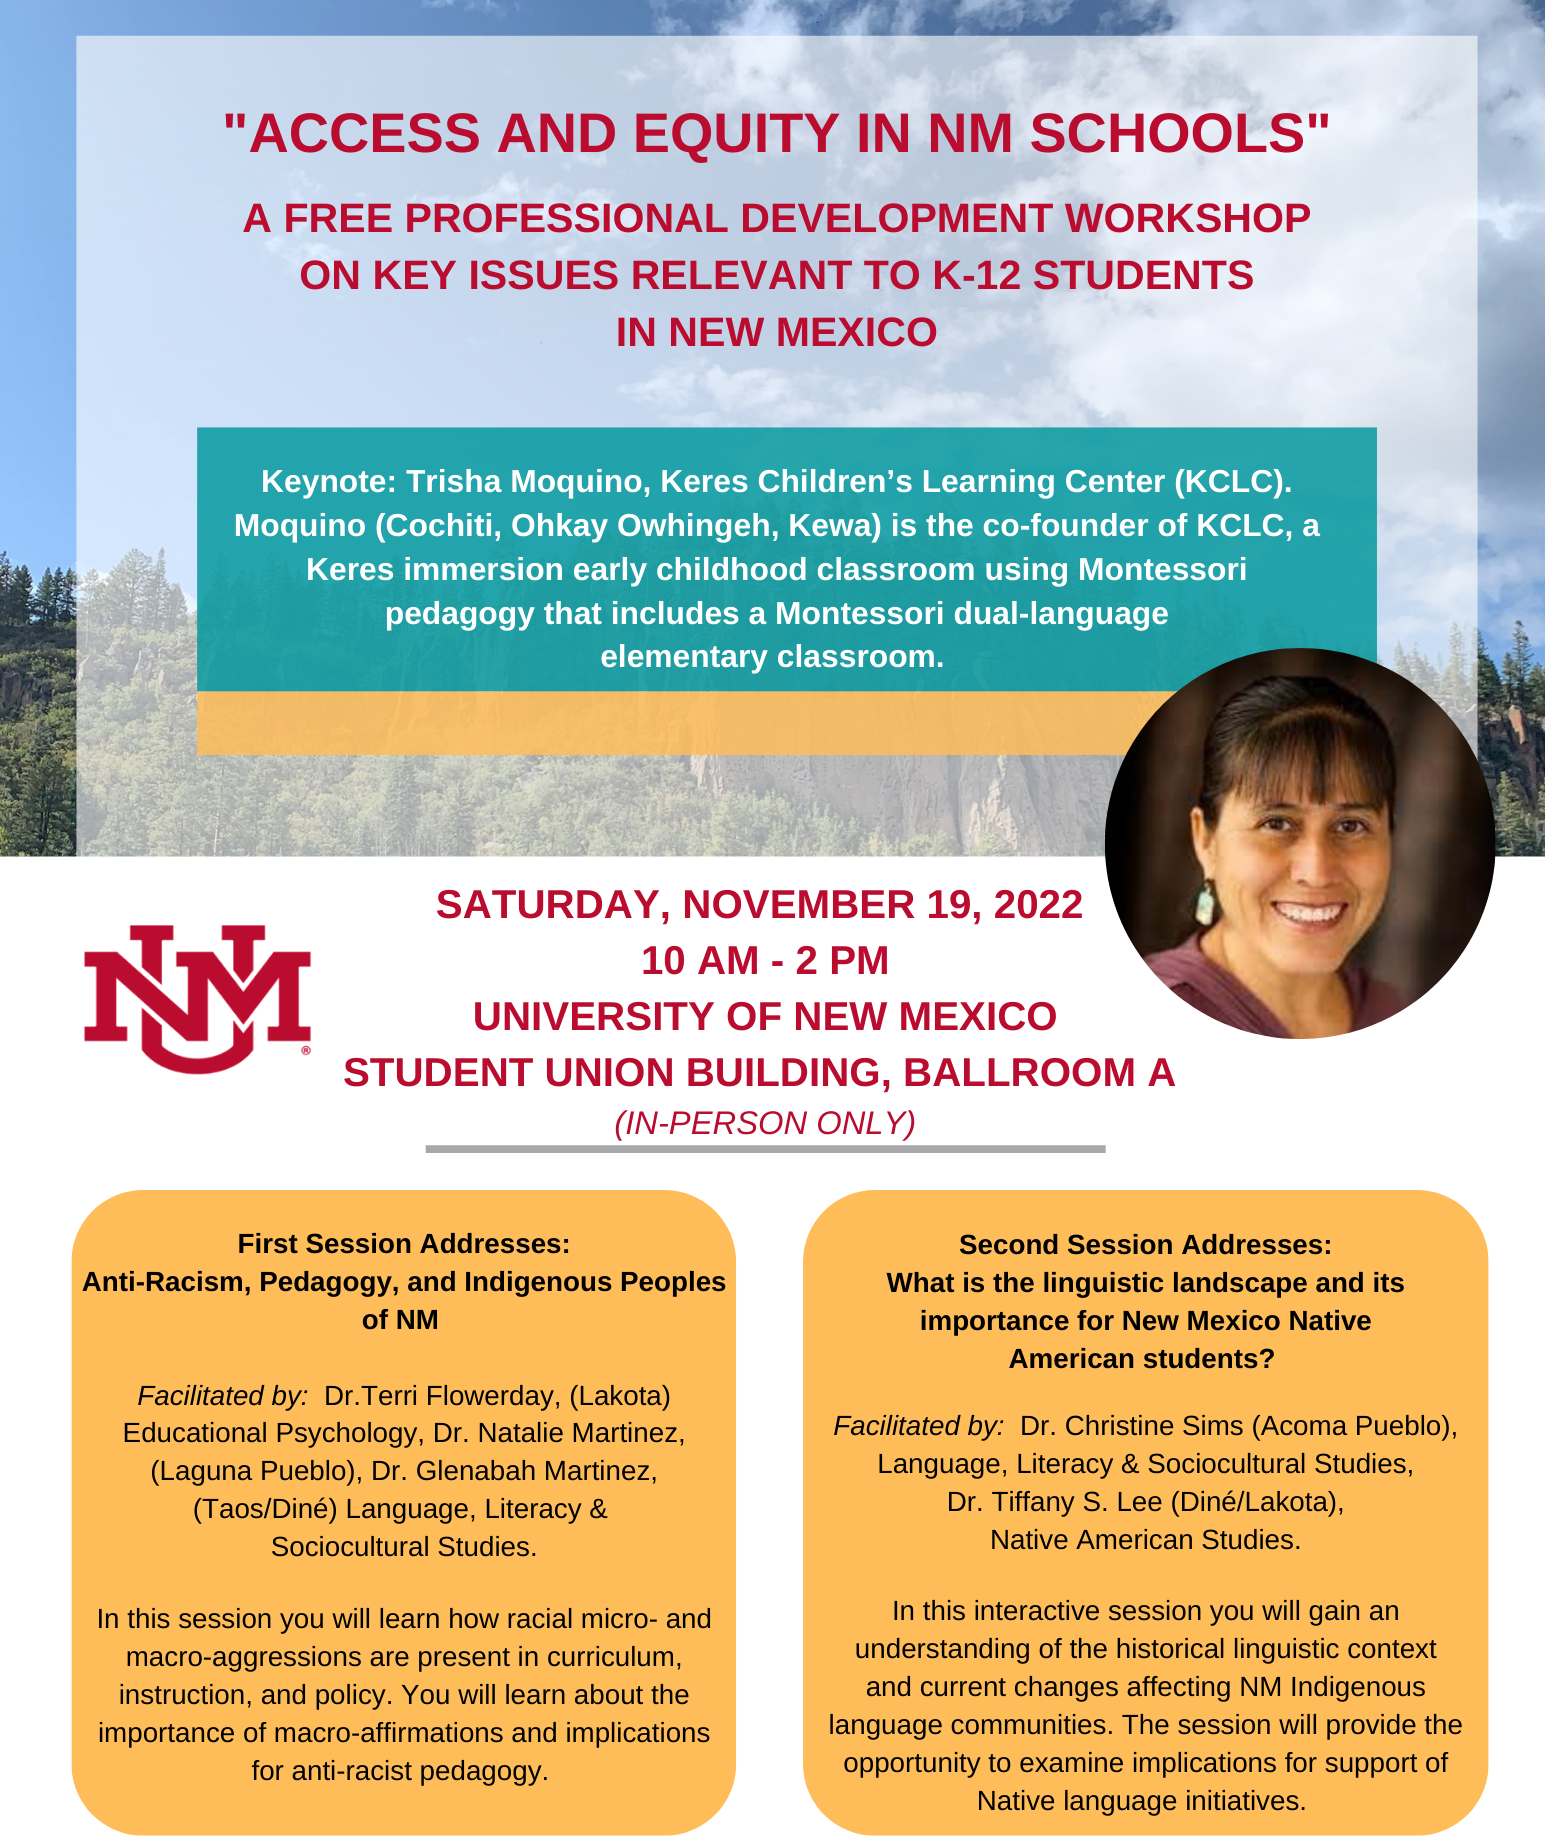 access-and-equity-in-nm-schools-a-free-professional-development-workshop-on-key-issues-relevant-to115.png